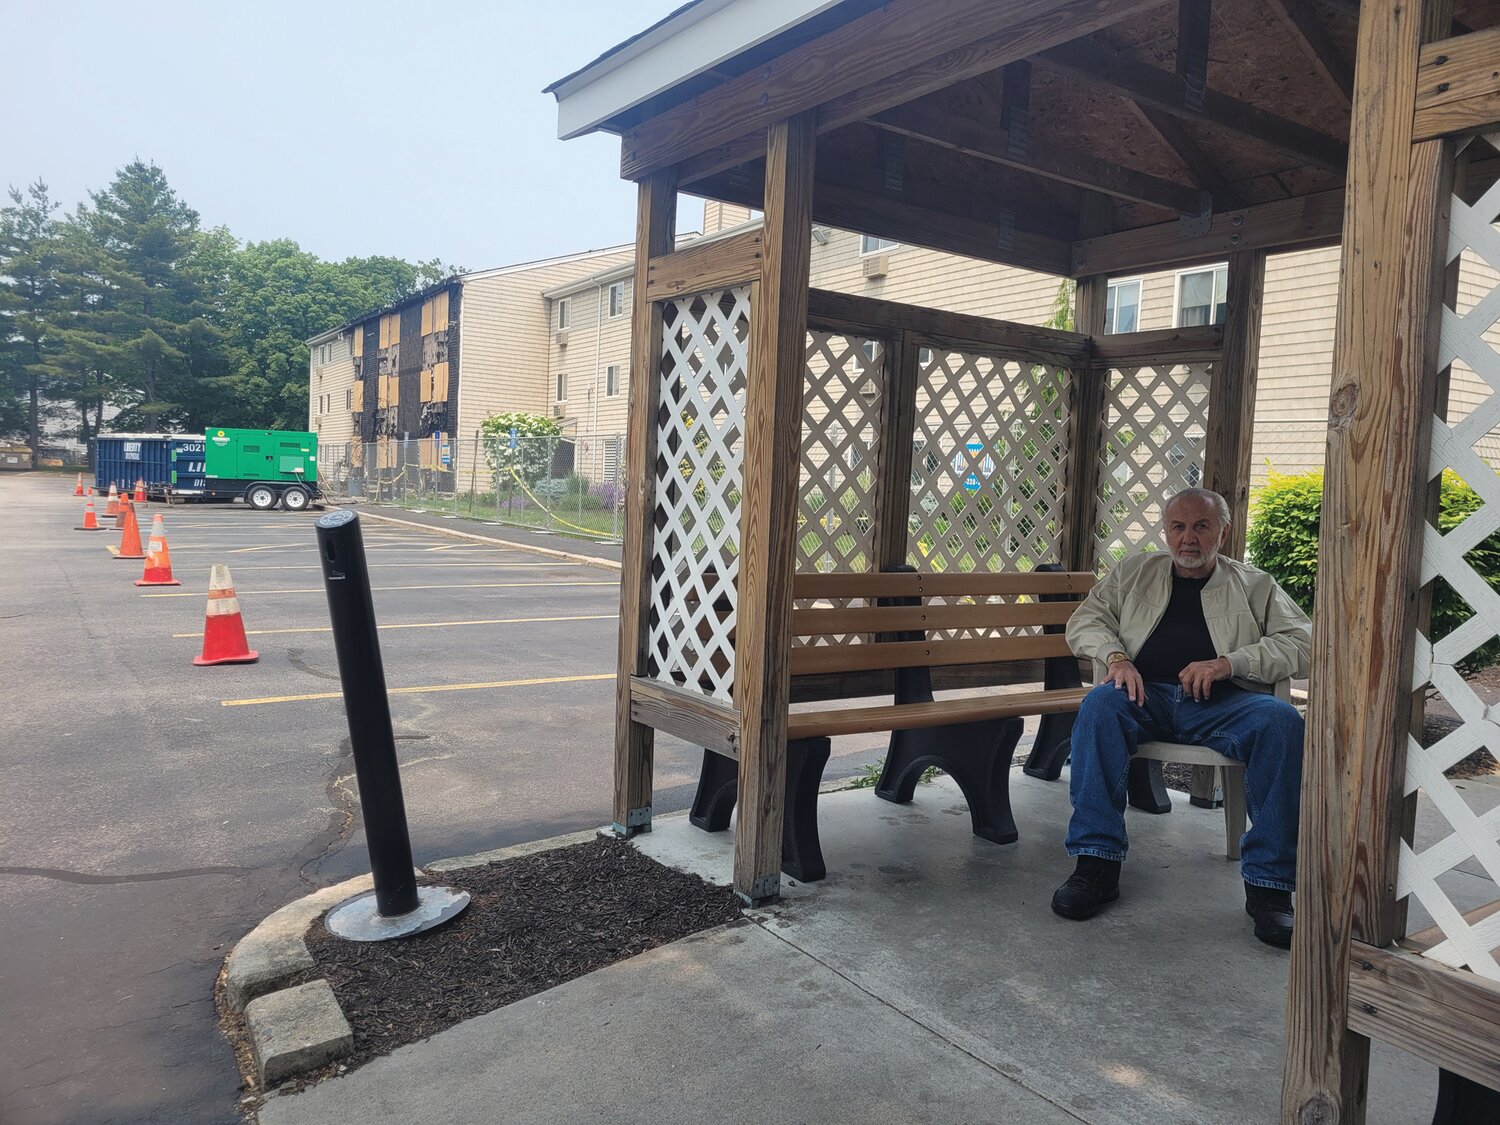 SMOKER’S HUT: Louis Furia still has his home, in a separate building. A lot of his friends are scrambling for housing, however, following the blaze at Simmons Village. He thinks the mulch surrounding all the complex buildings should be removed and replaced with crushed stone.